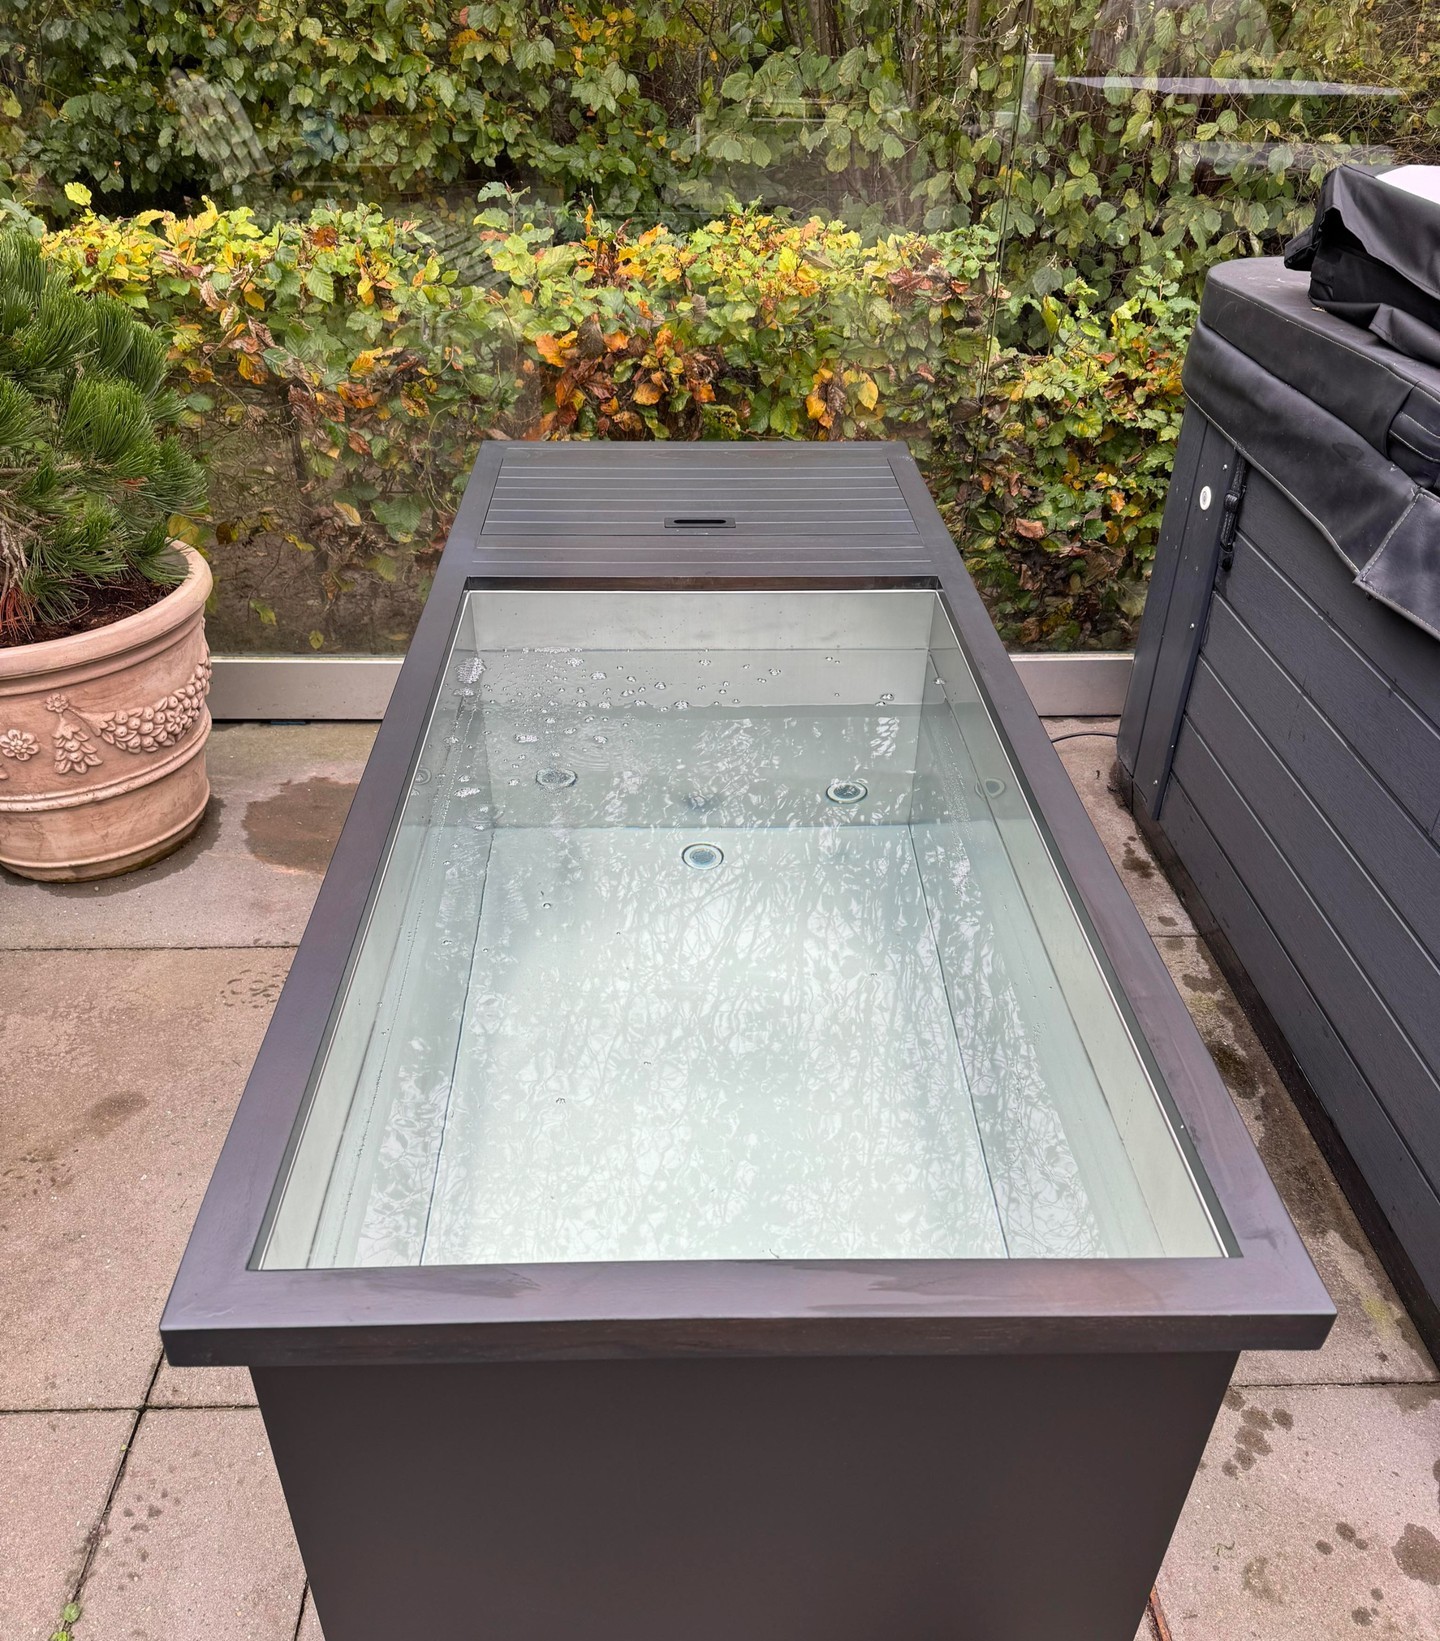 Thanks to Royal Bad   Spa - SpaCenter i Kolding for sharing one of their recent Chill Tub installs in Denmark        It s great to see more people trying cold water therapy to improve their physical and mental health        #icebath #chilltubs #coldwatertherapy #coldwaterimmersion #icebaths